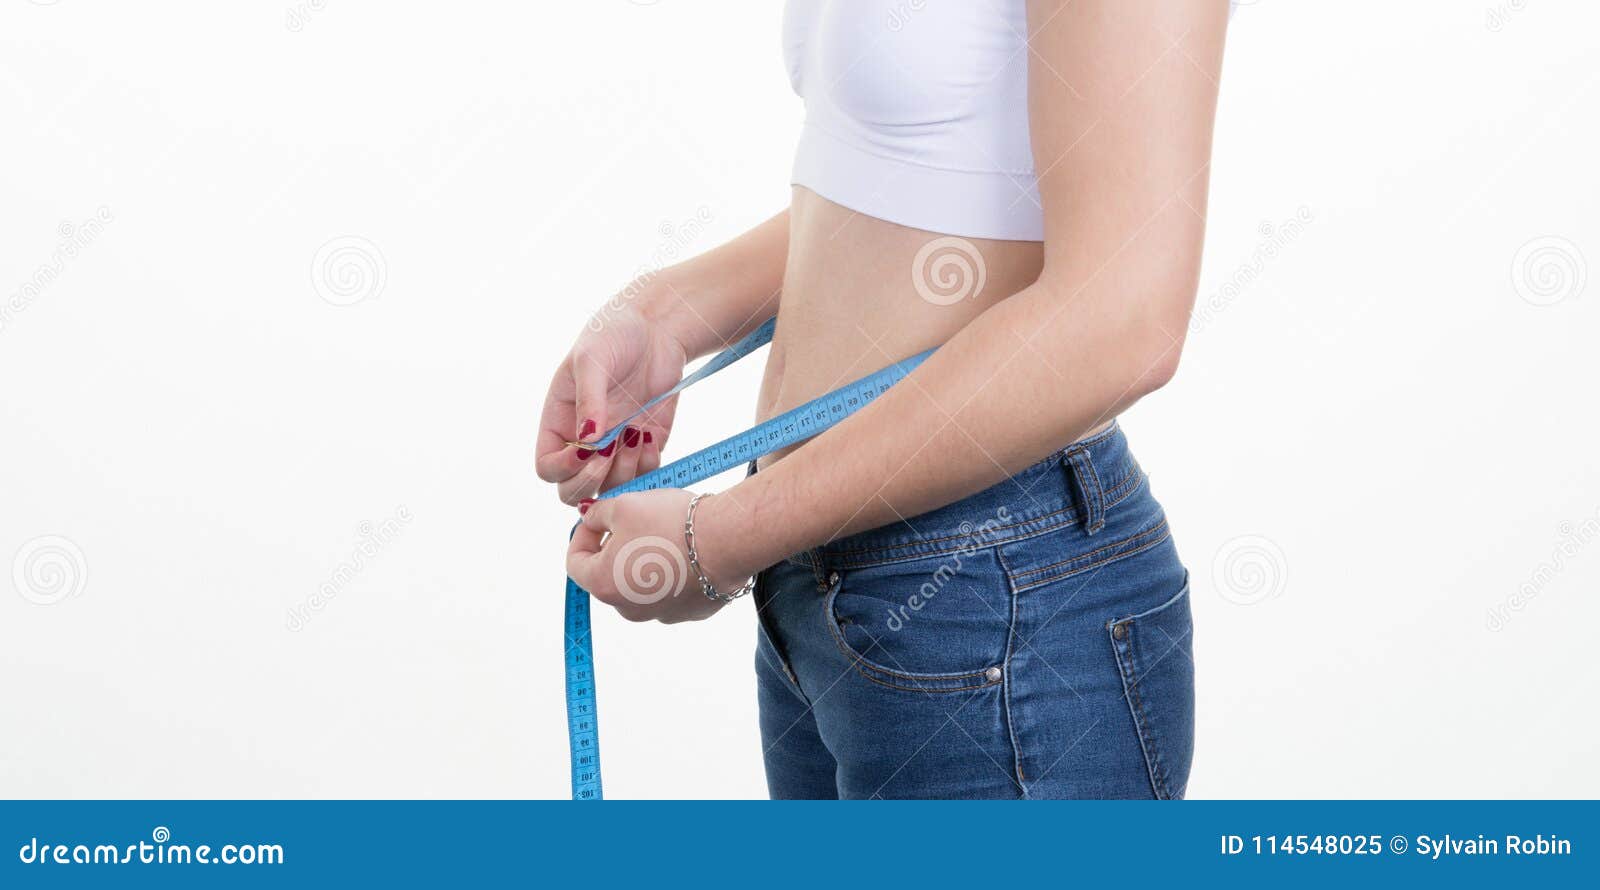 Woman Diet Background Fitness Concept Weight Loss Beautiful Body  Measurement Tape Stock Image - Image of weight, shape: 114548025